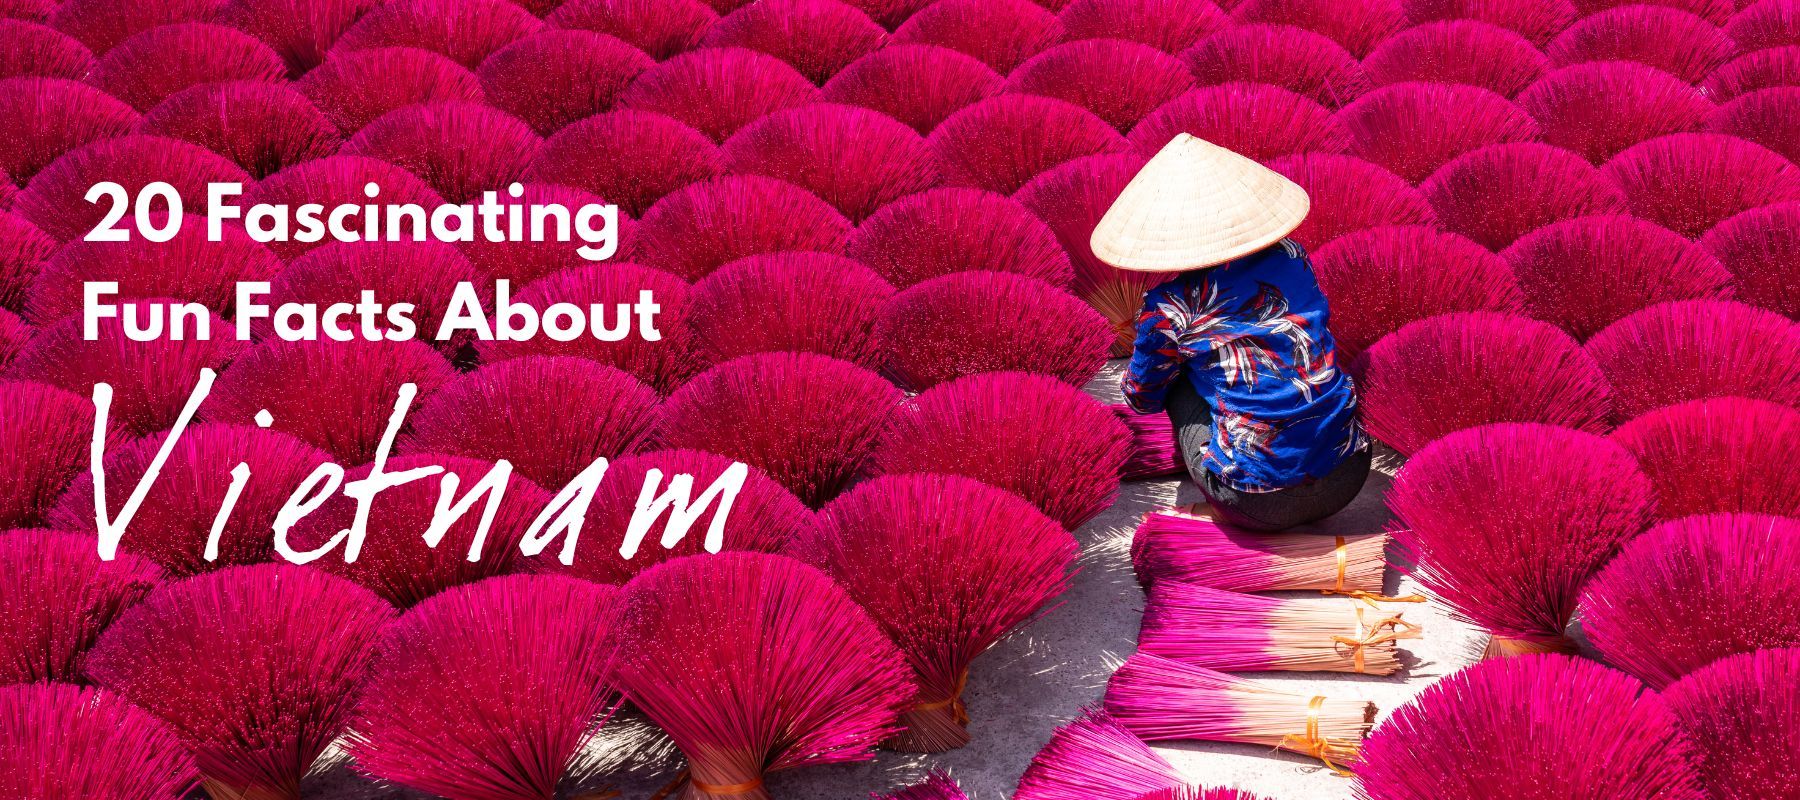 20 fascinating fun facts about Vietnam